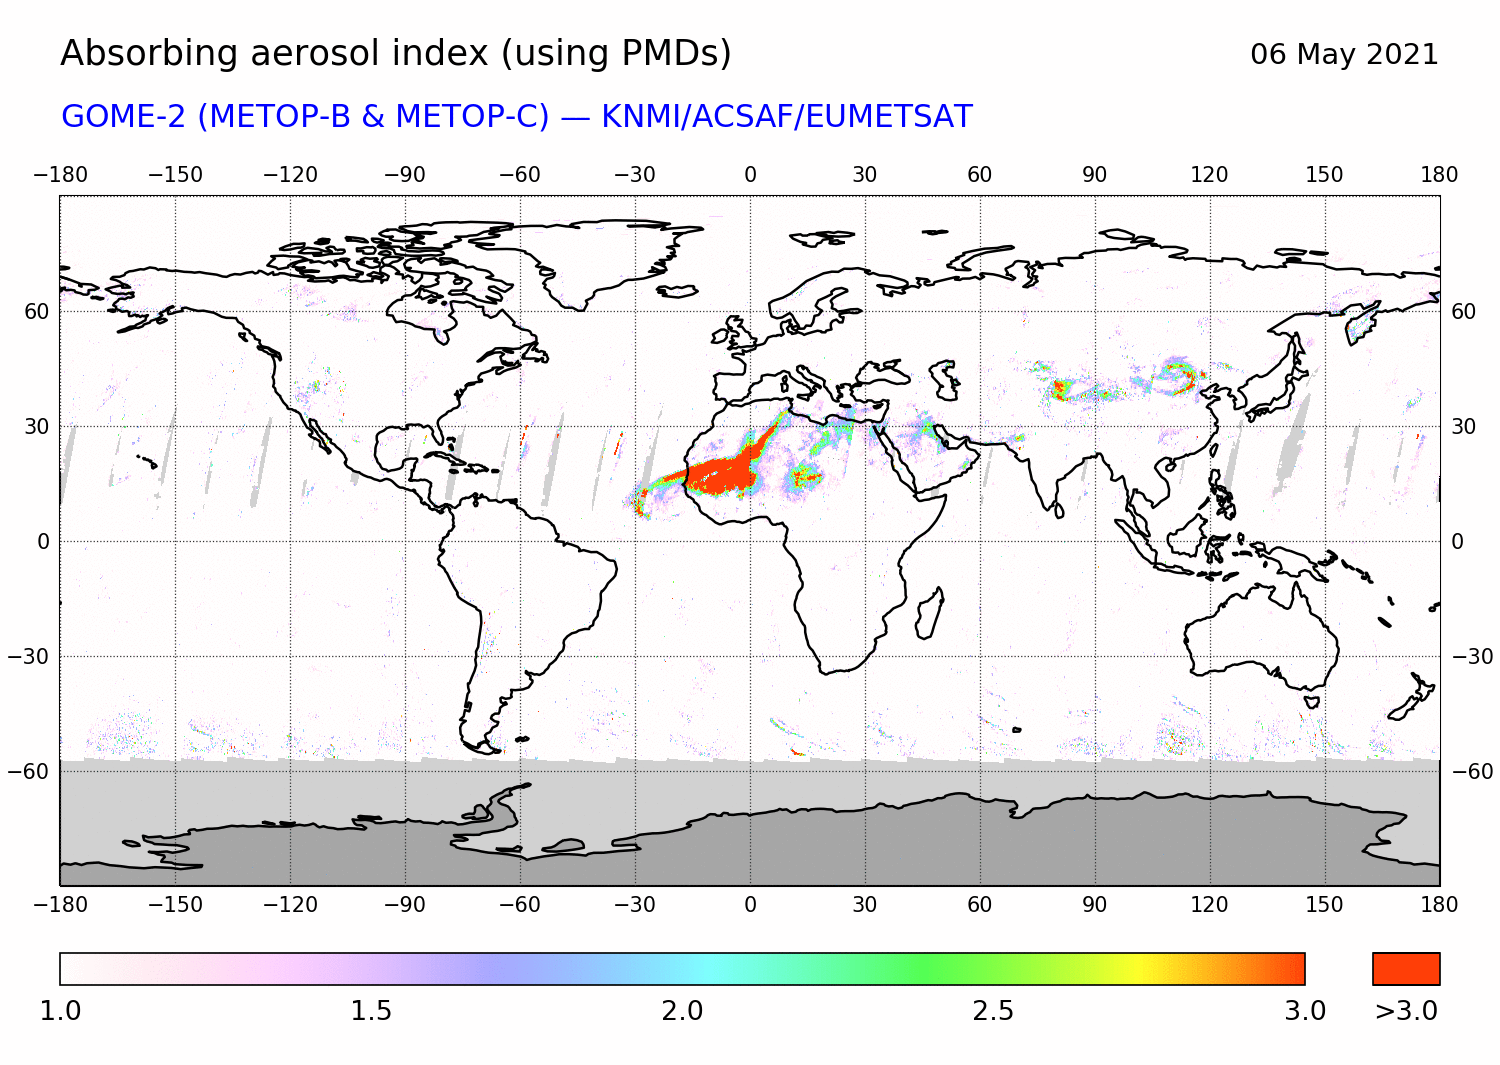 GOME-2 - Absorbing aerosol index of 06 May 2021